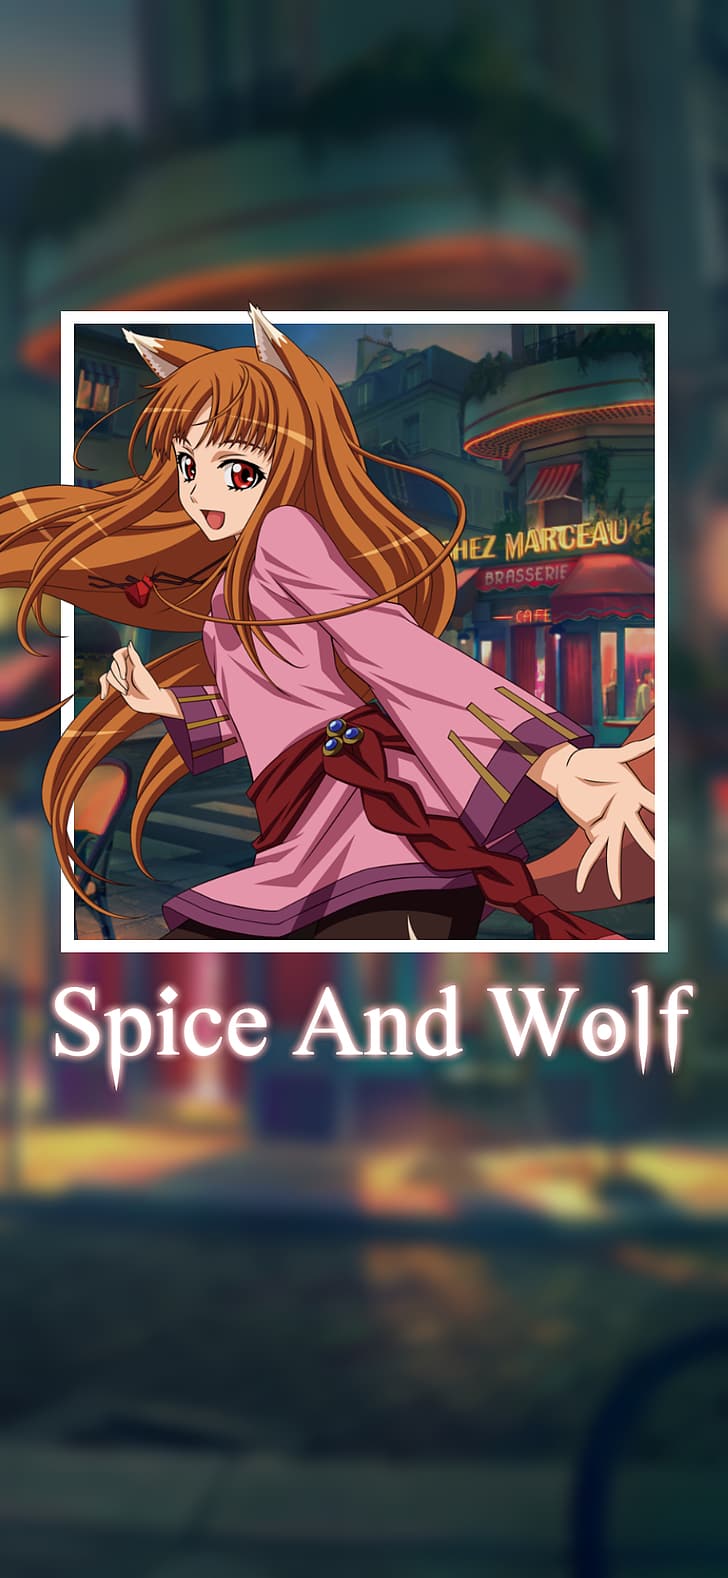 spice-and-wolf-ii